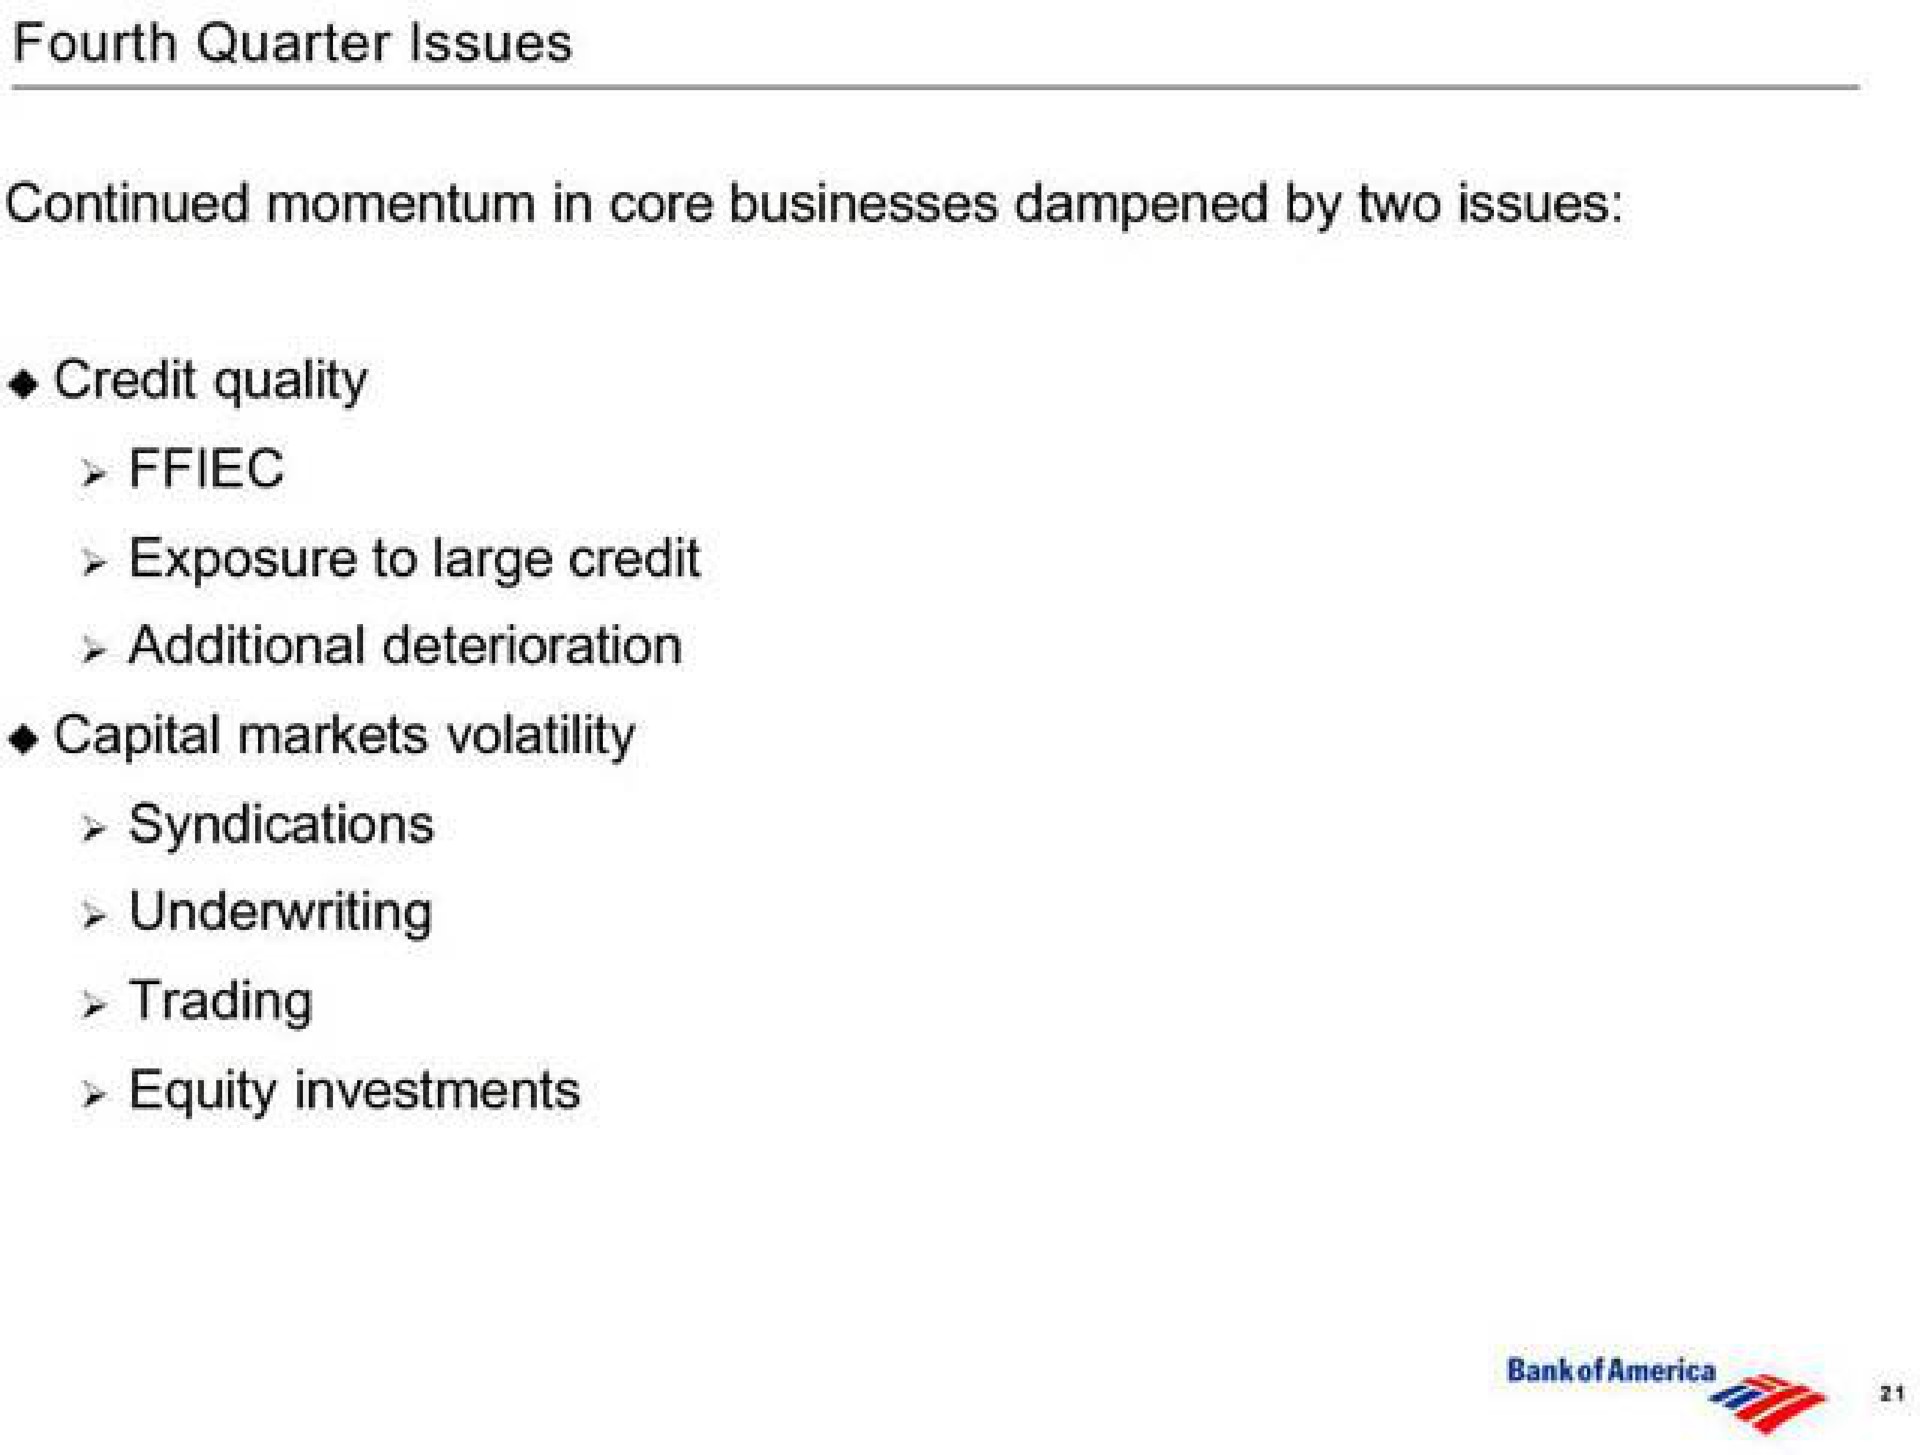 fourth quarter issues continued momentum in core businesses dampened by two issues credit quality exposure to large credit additional deterioration capital markets volatility syndications underwriting trading equity investments | Bank of America